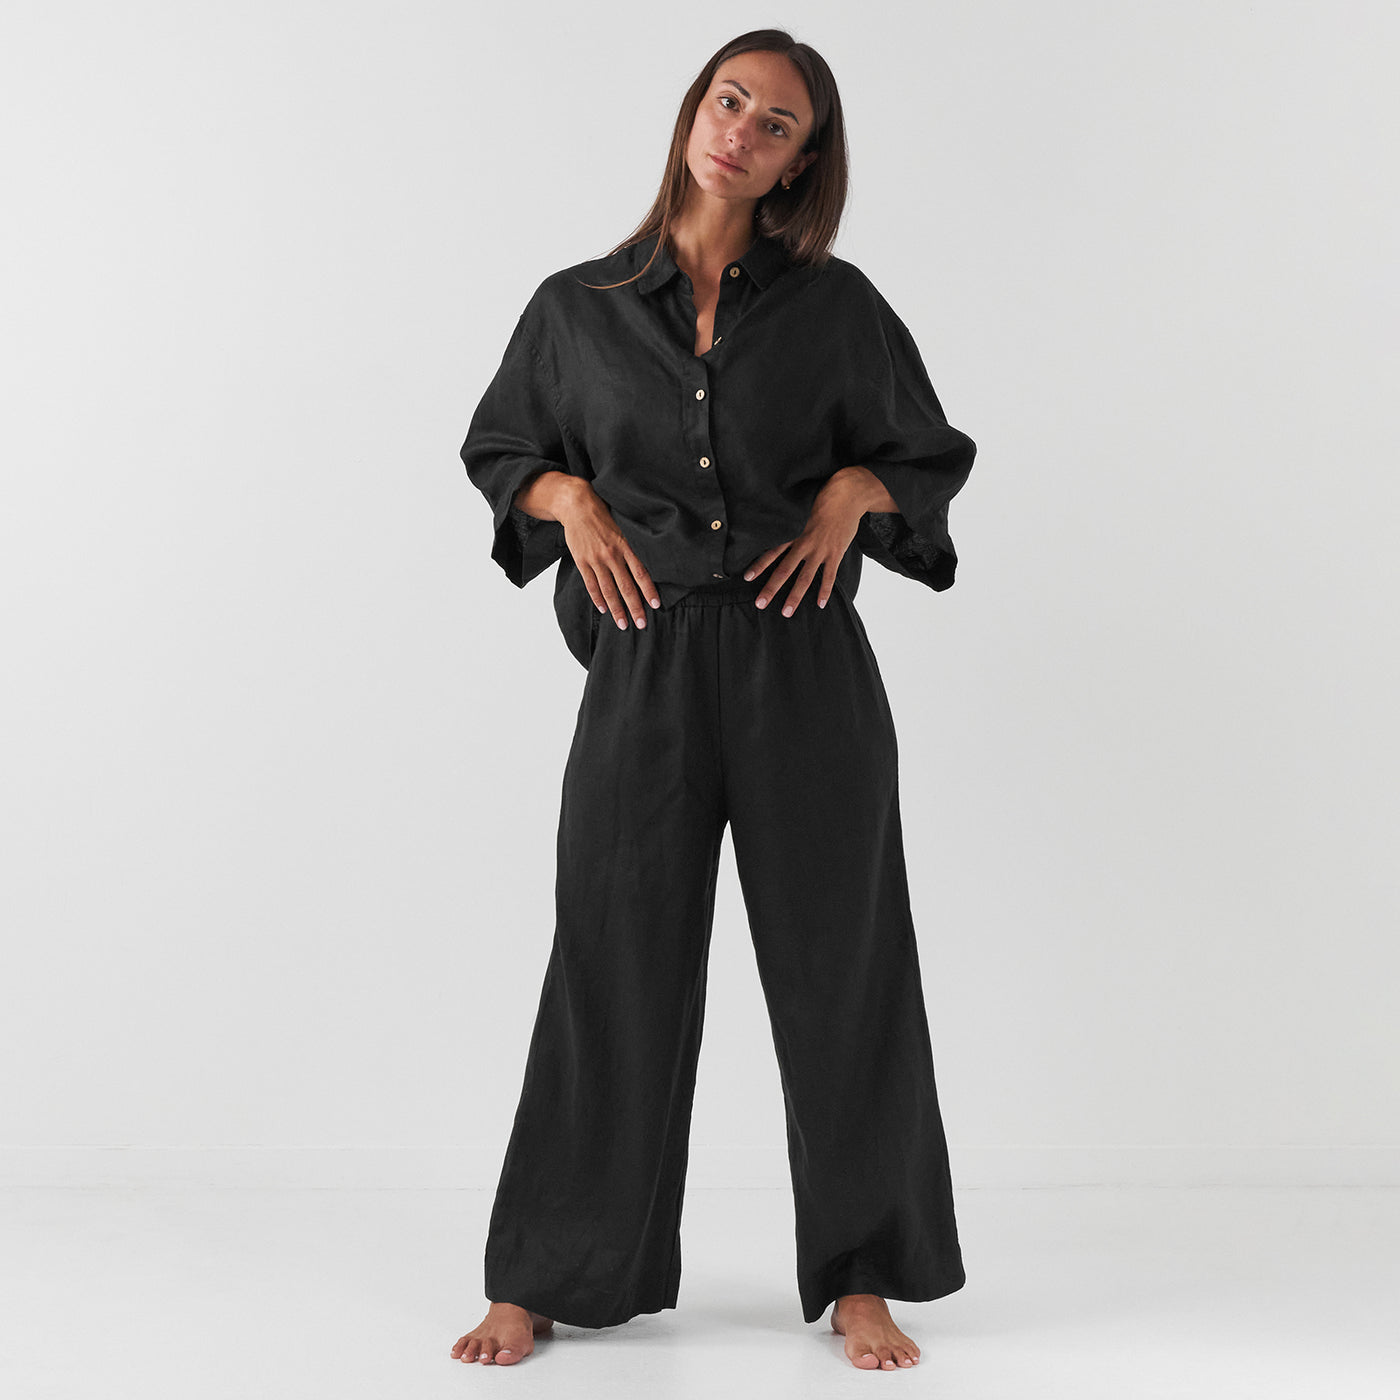 French Flax Linen Lounge Pant in Black